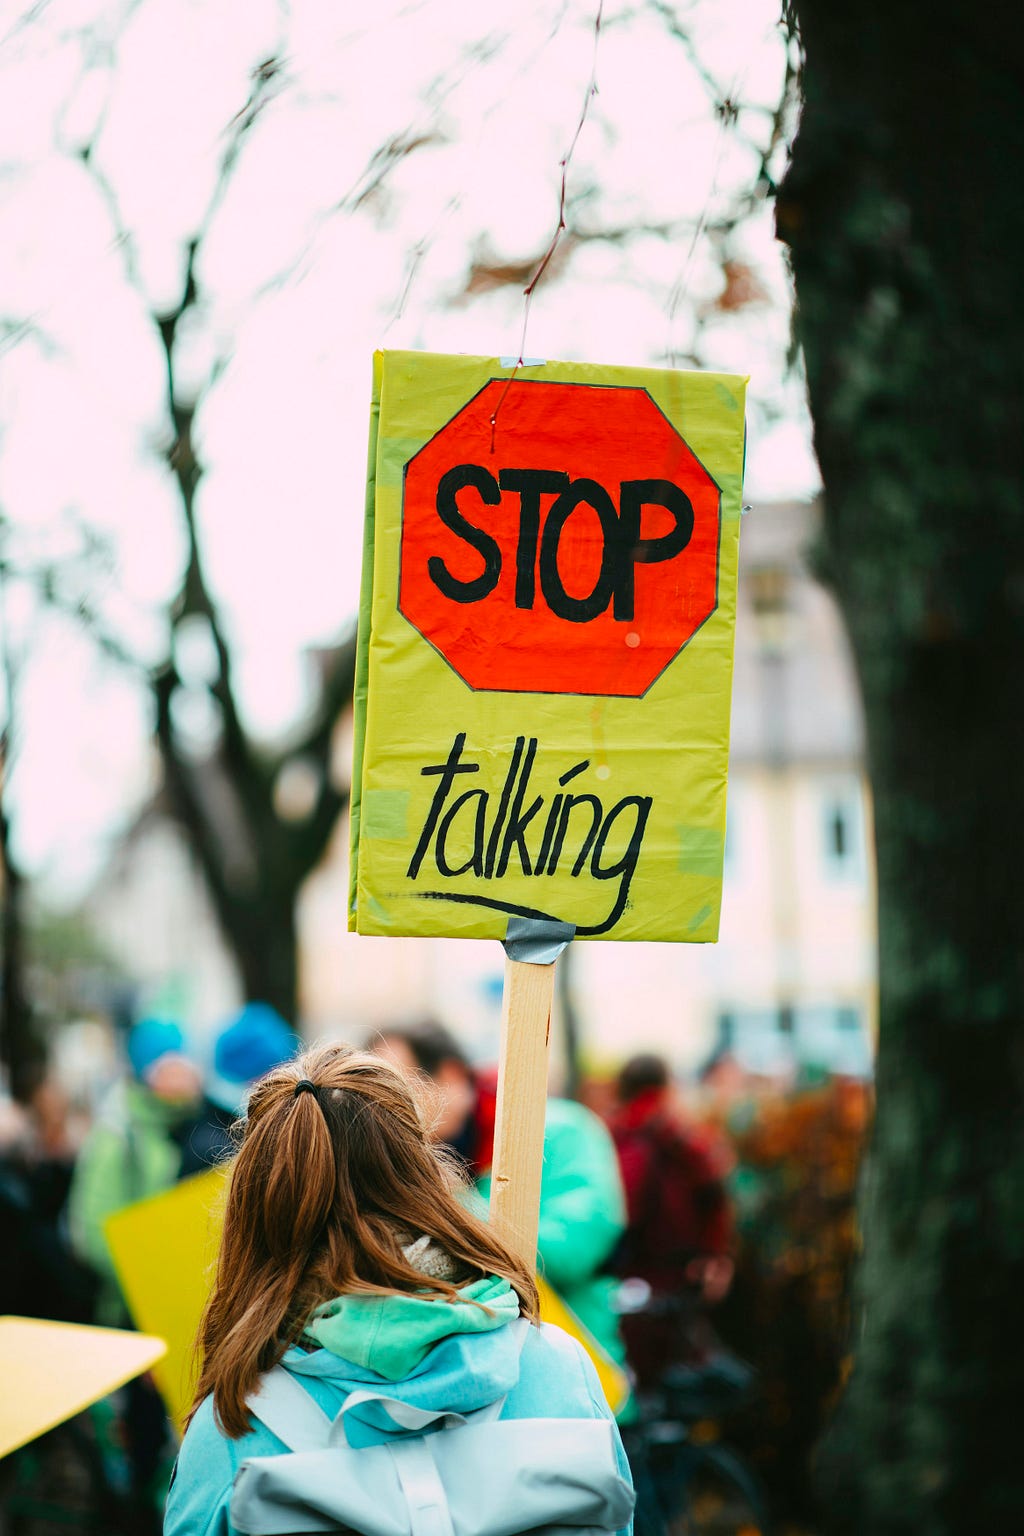 As viewed from behind, a person at a gathering, is holding up a sign. The sign is yellow with an orange-red octagon at the top containing the word “Stop”. Underneath is written “talking”.